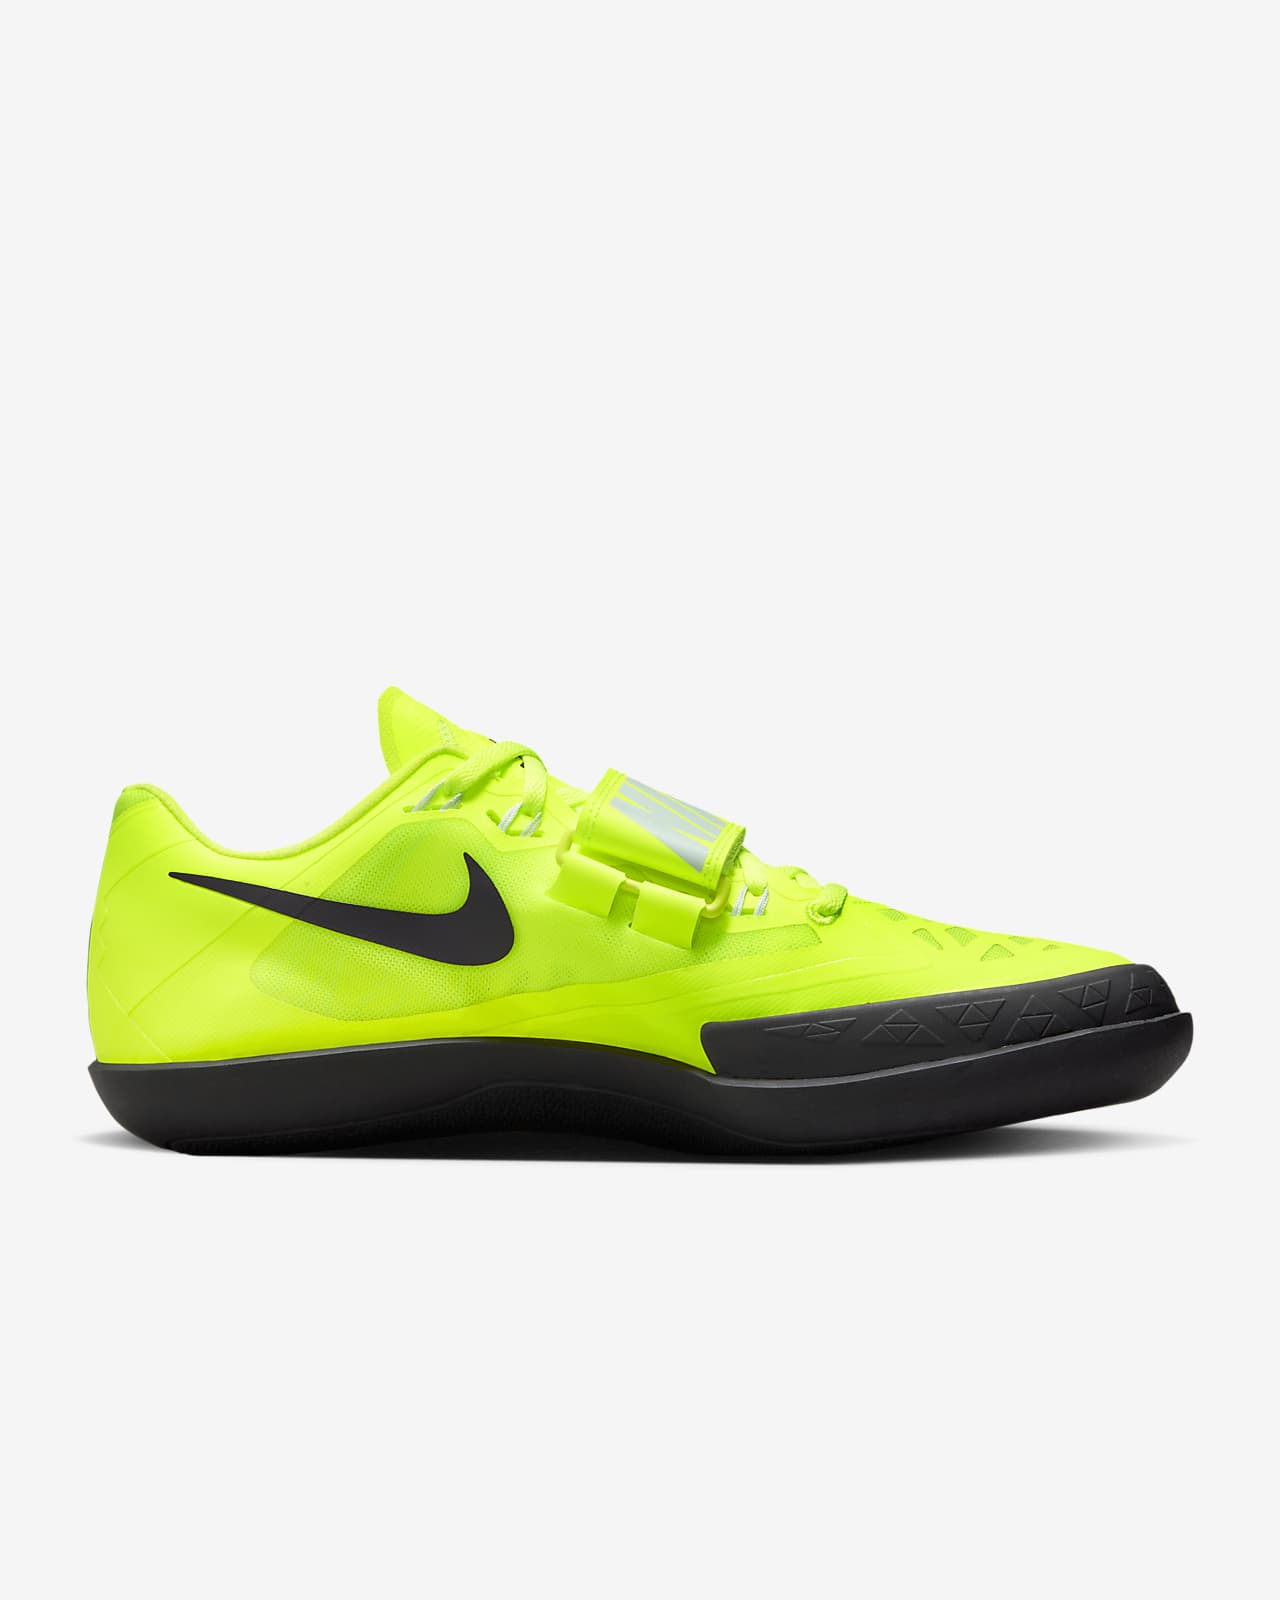 Nike Zoom Sd Track And Field Shoes | lupon.gov.ph